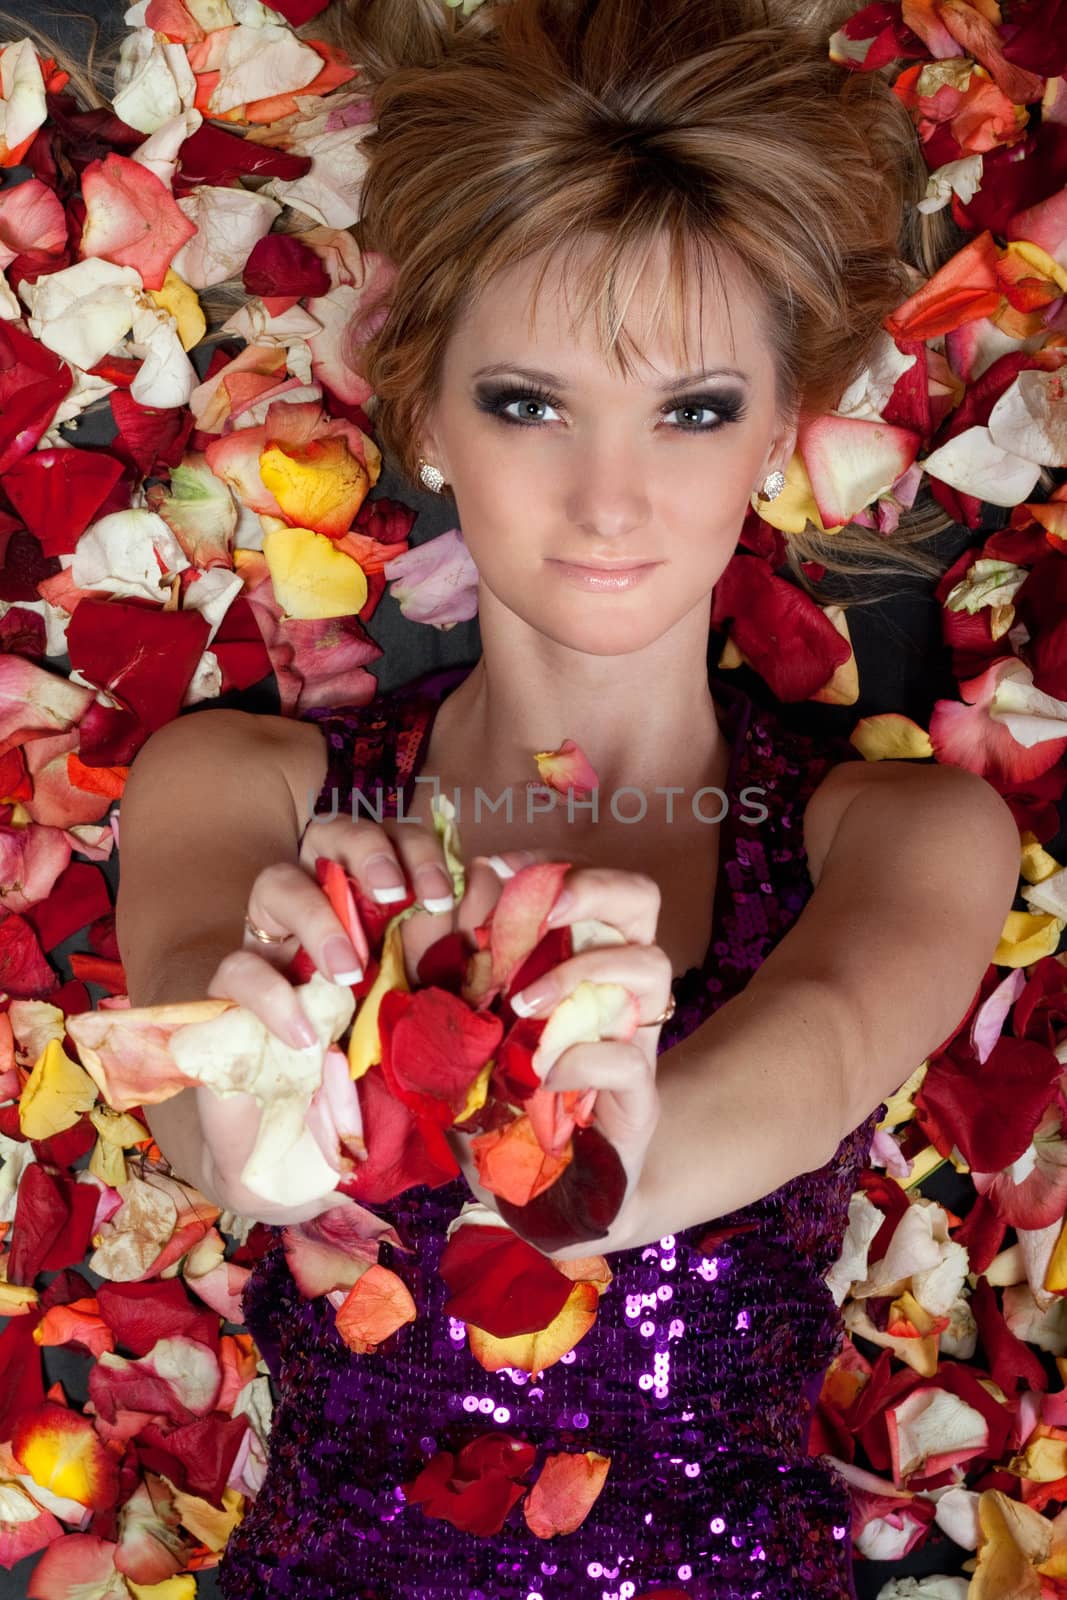 charming young blonde lying in rose petals by acidgrey